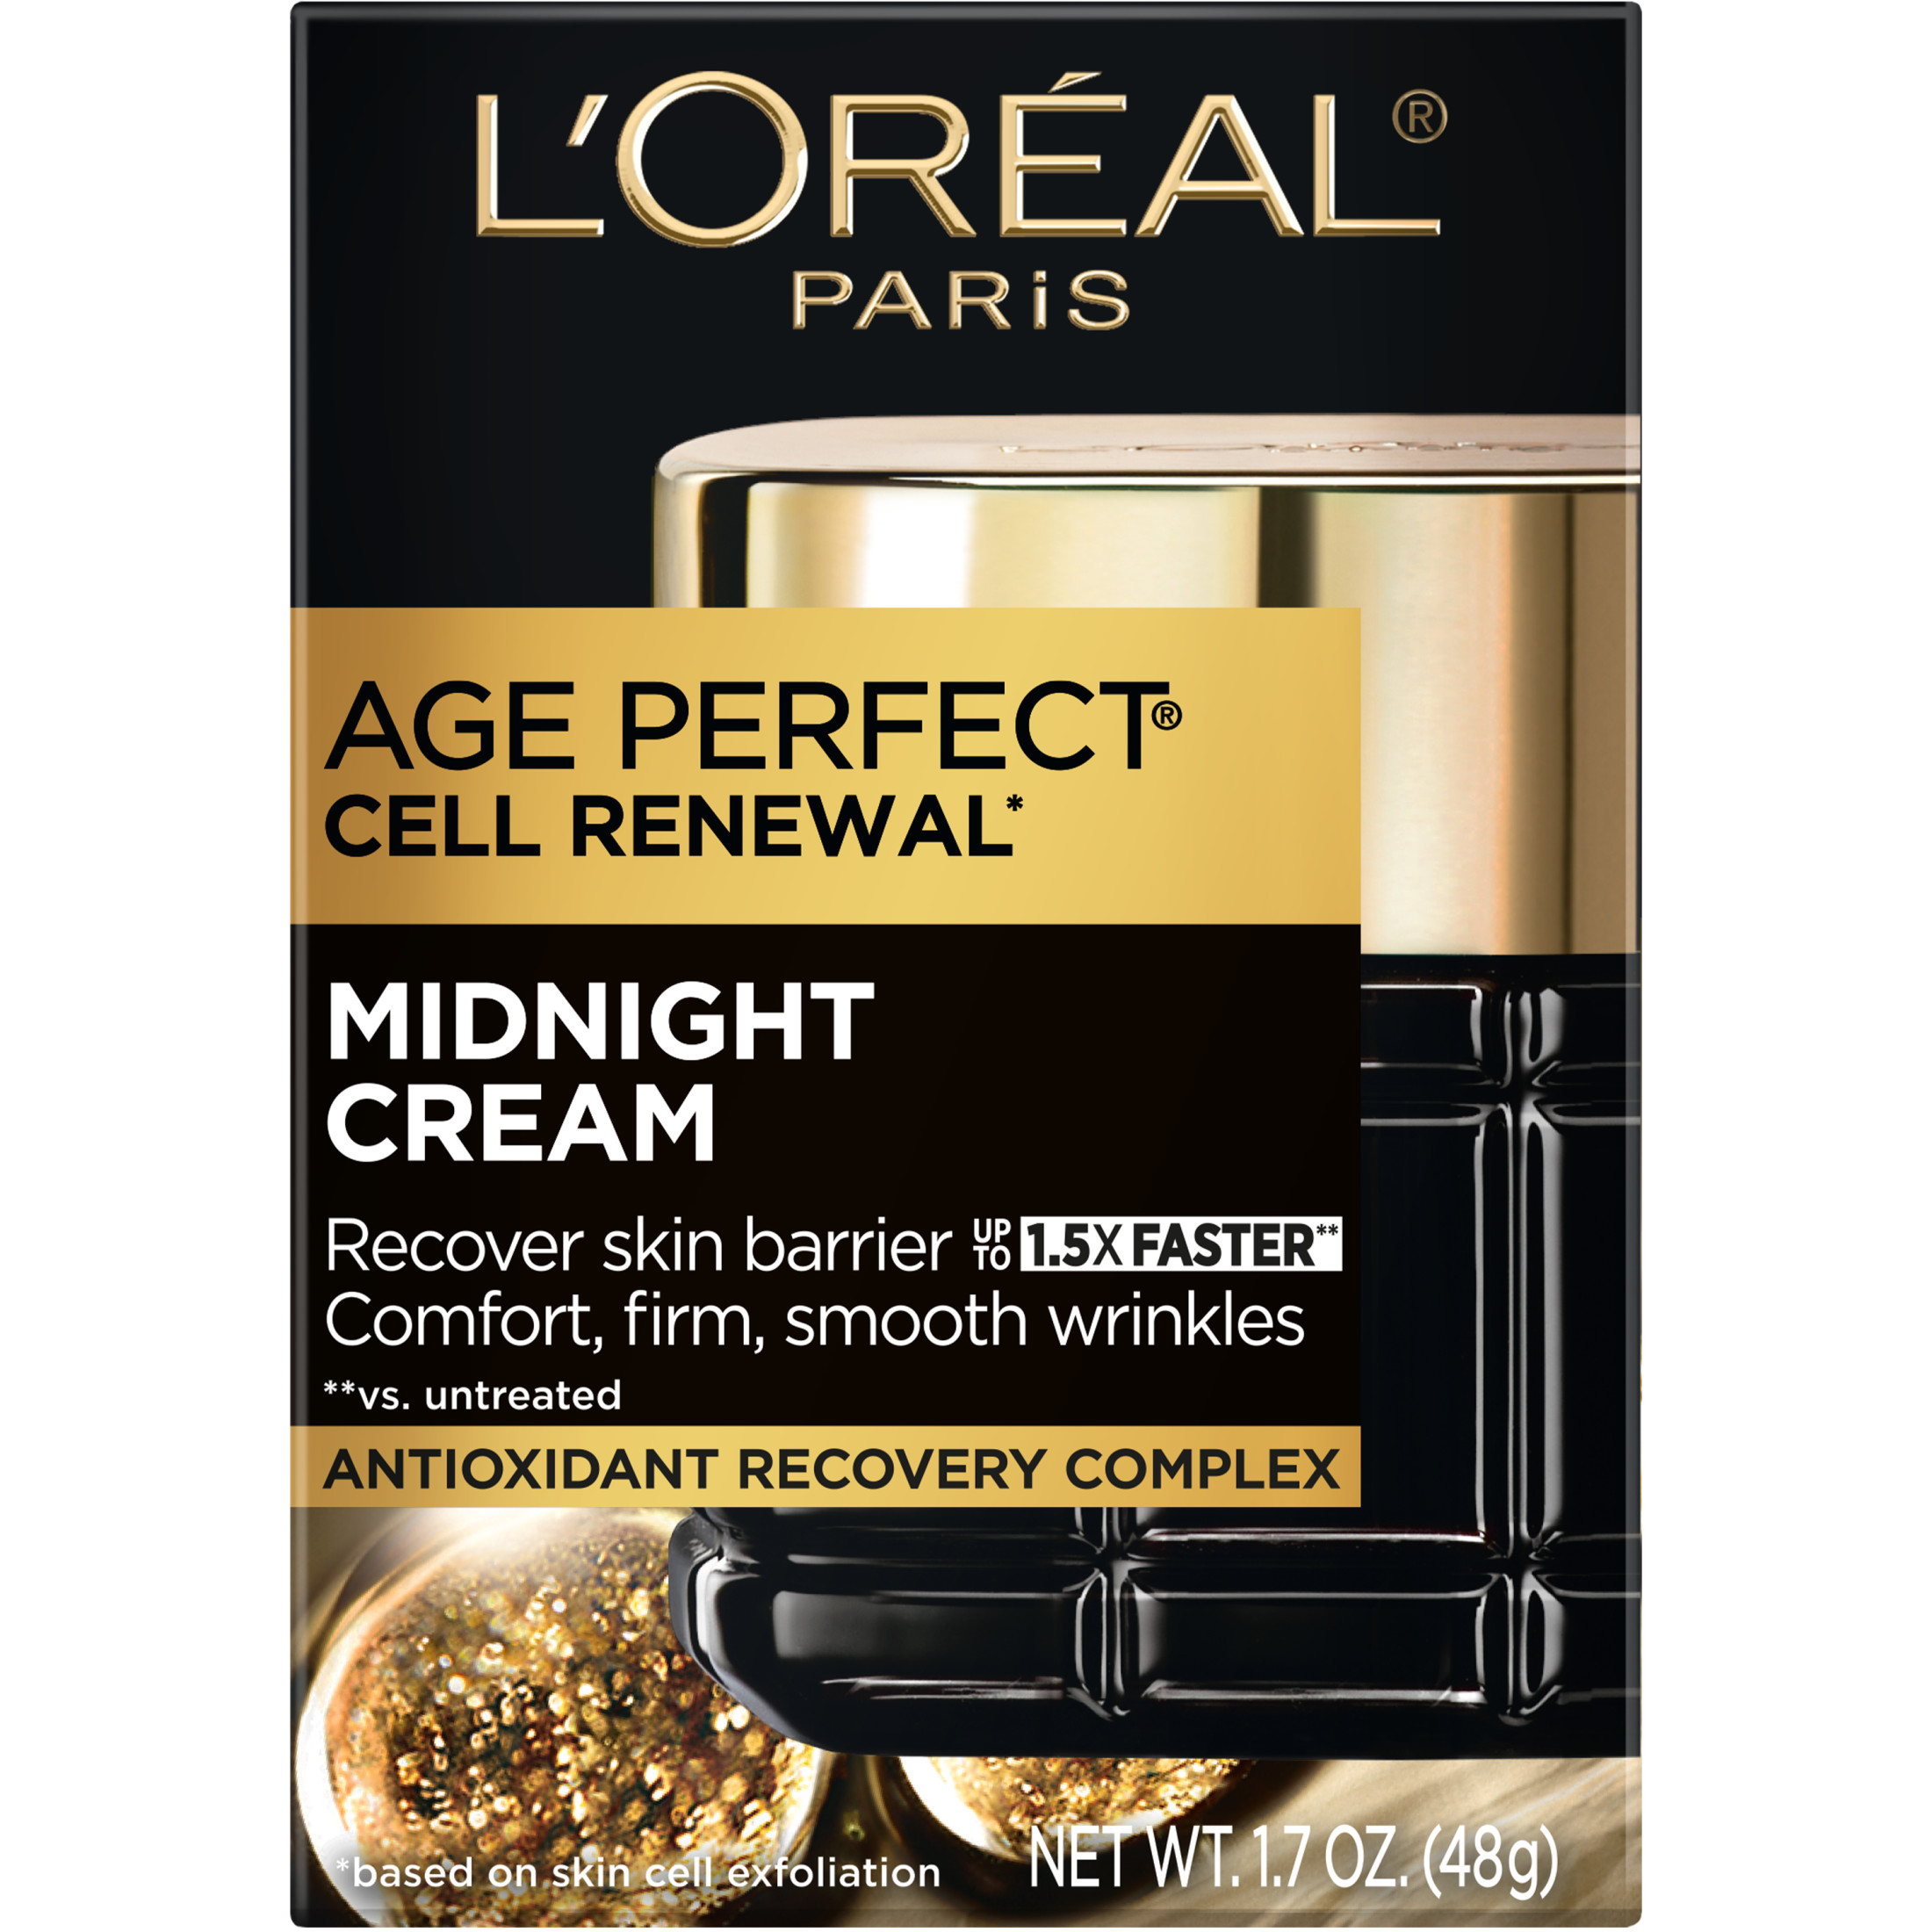 L'Oreal Paris Age Perfect Caring Cell Renewal Midnight Cream, Antioxidants, 1.7 oz - image 3 of 10